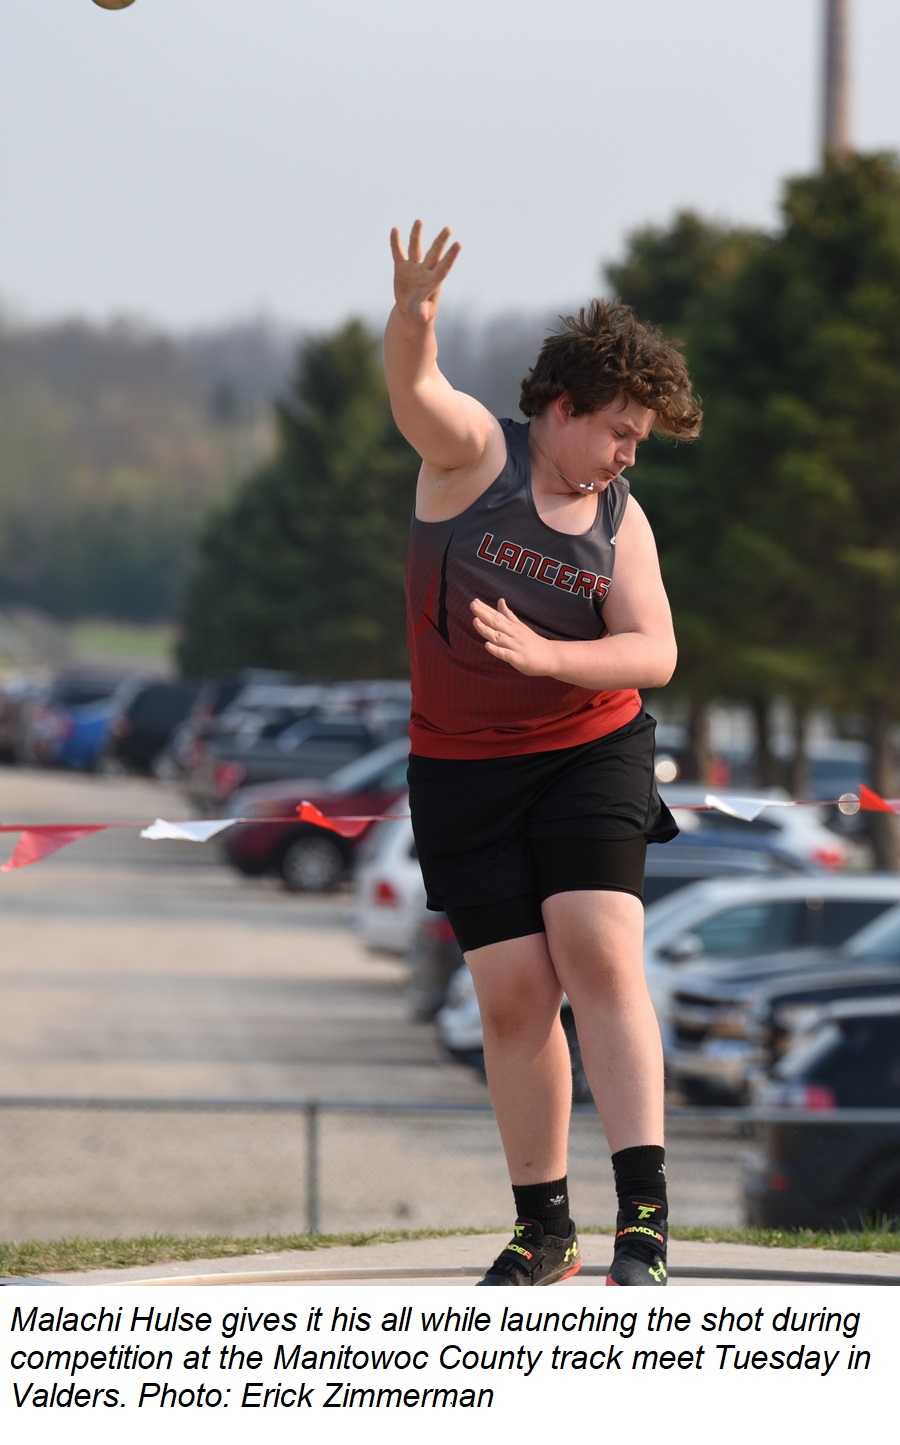 Malachi Hulse gives it his all while launching the shot during competition at the Manitowoc County track meet Tuesday.